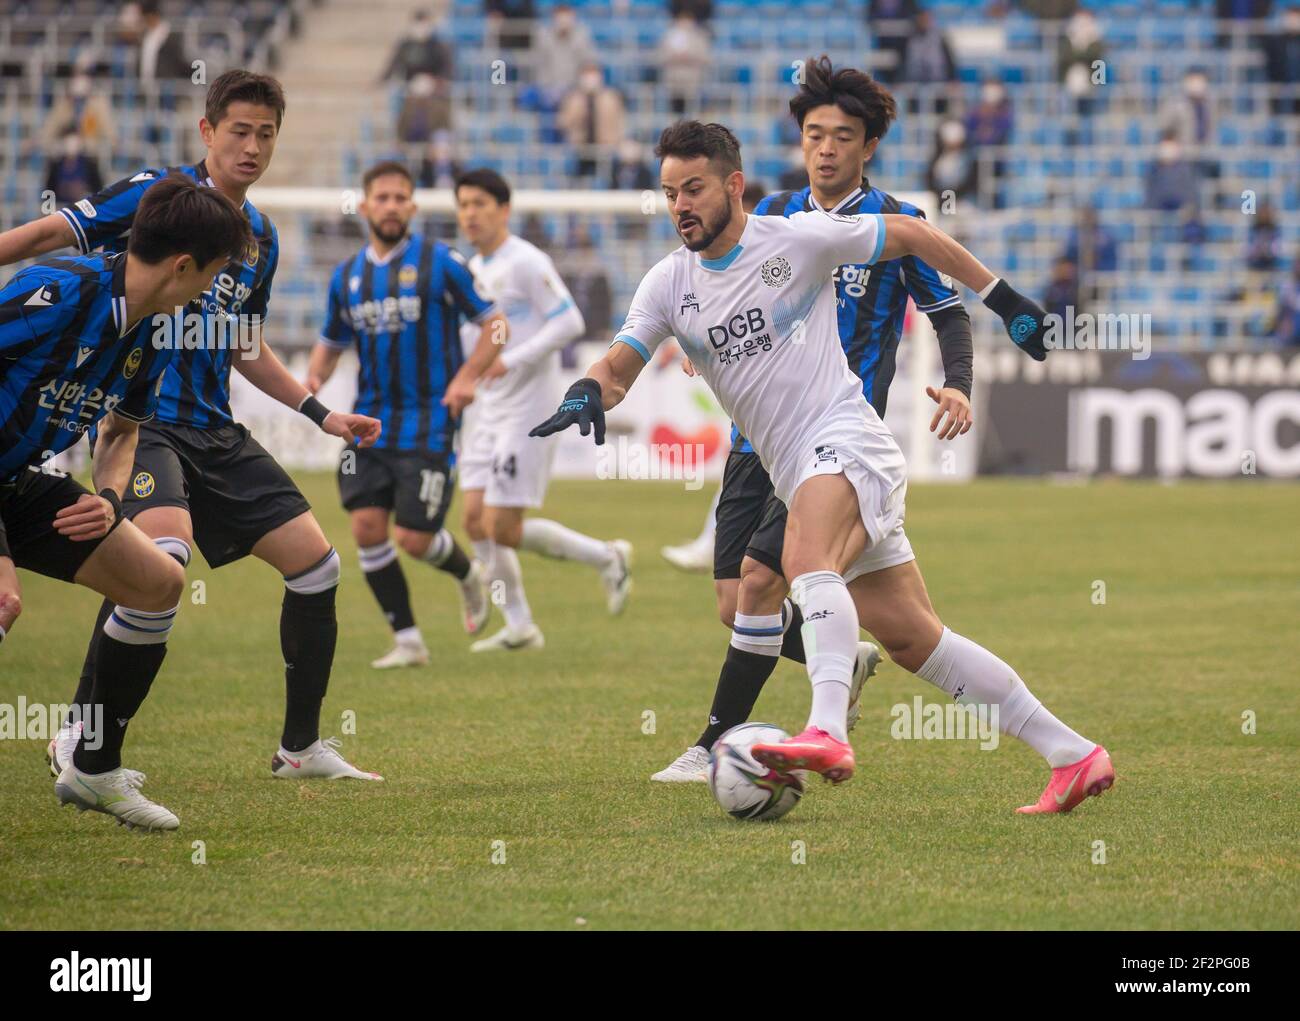 Incheon, South Korea. 06th Mar, 2021. Brazilian Cesar Fernando Silva Melo (front R) of Daegu FC, Song Si-Woo (R, 2nd row) and Mun Ji-Hwan (2nd L) of Incheon United FC in action during the 2nd round of the 2021 K League 1 soccer match between Incheon United FC and Daegu FC at the Incheon Football Stadium.(Final score; Incheon United FC 2:1 Daegu FC) (Photo by Jaewon Lee/SOPA Images/Sipa USA) Credit: Sipa USA/Alamy Live News Stock Photo